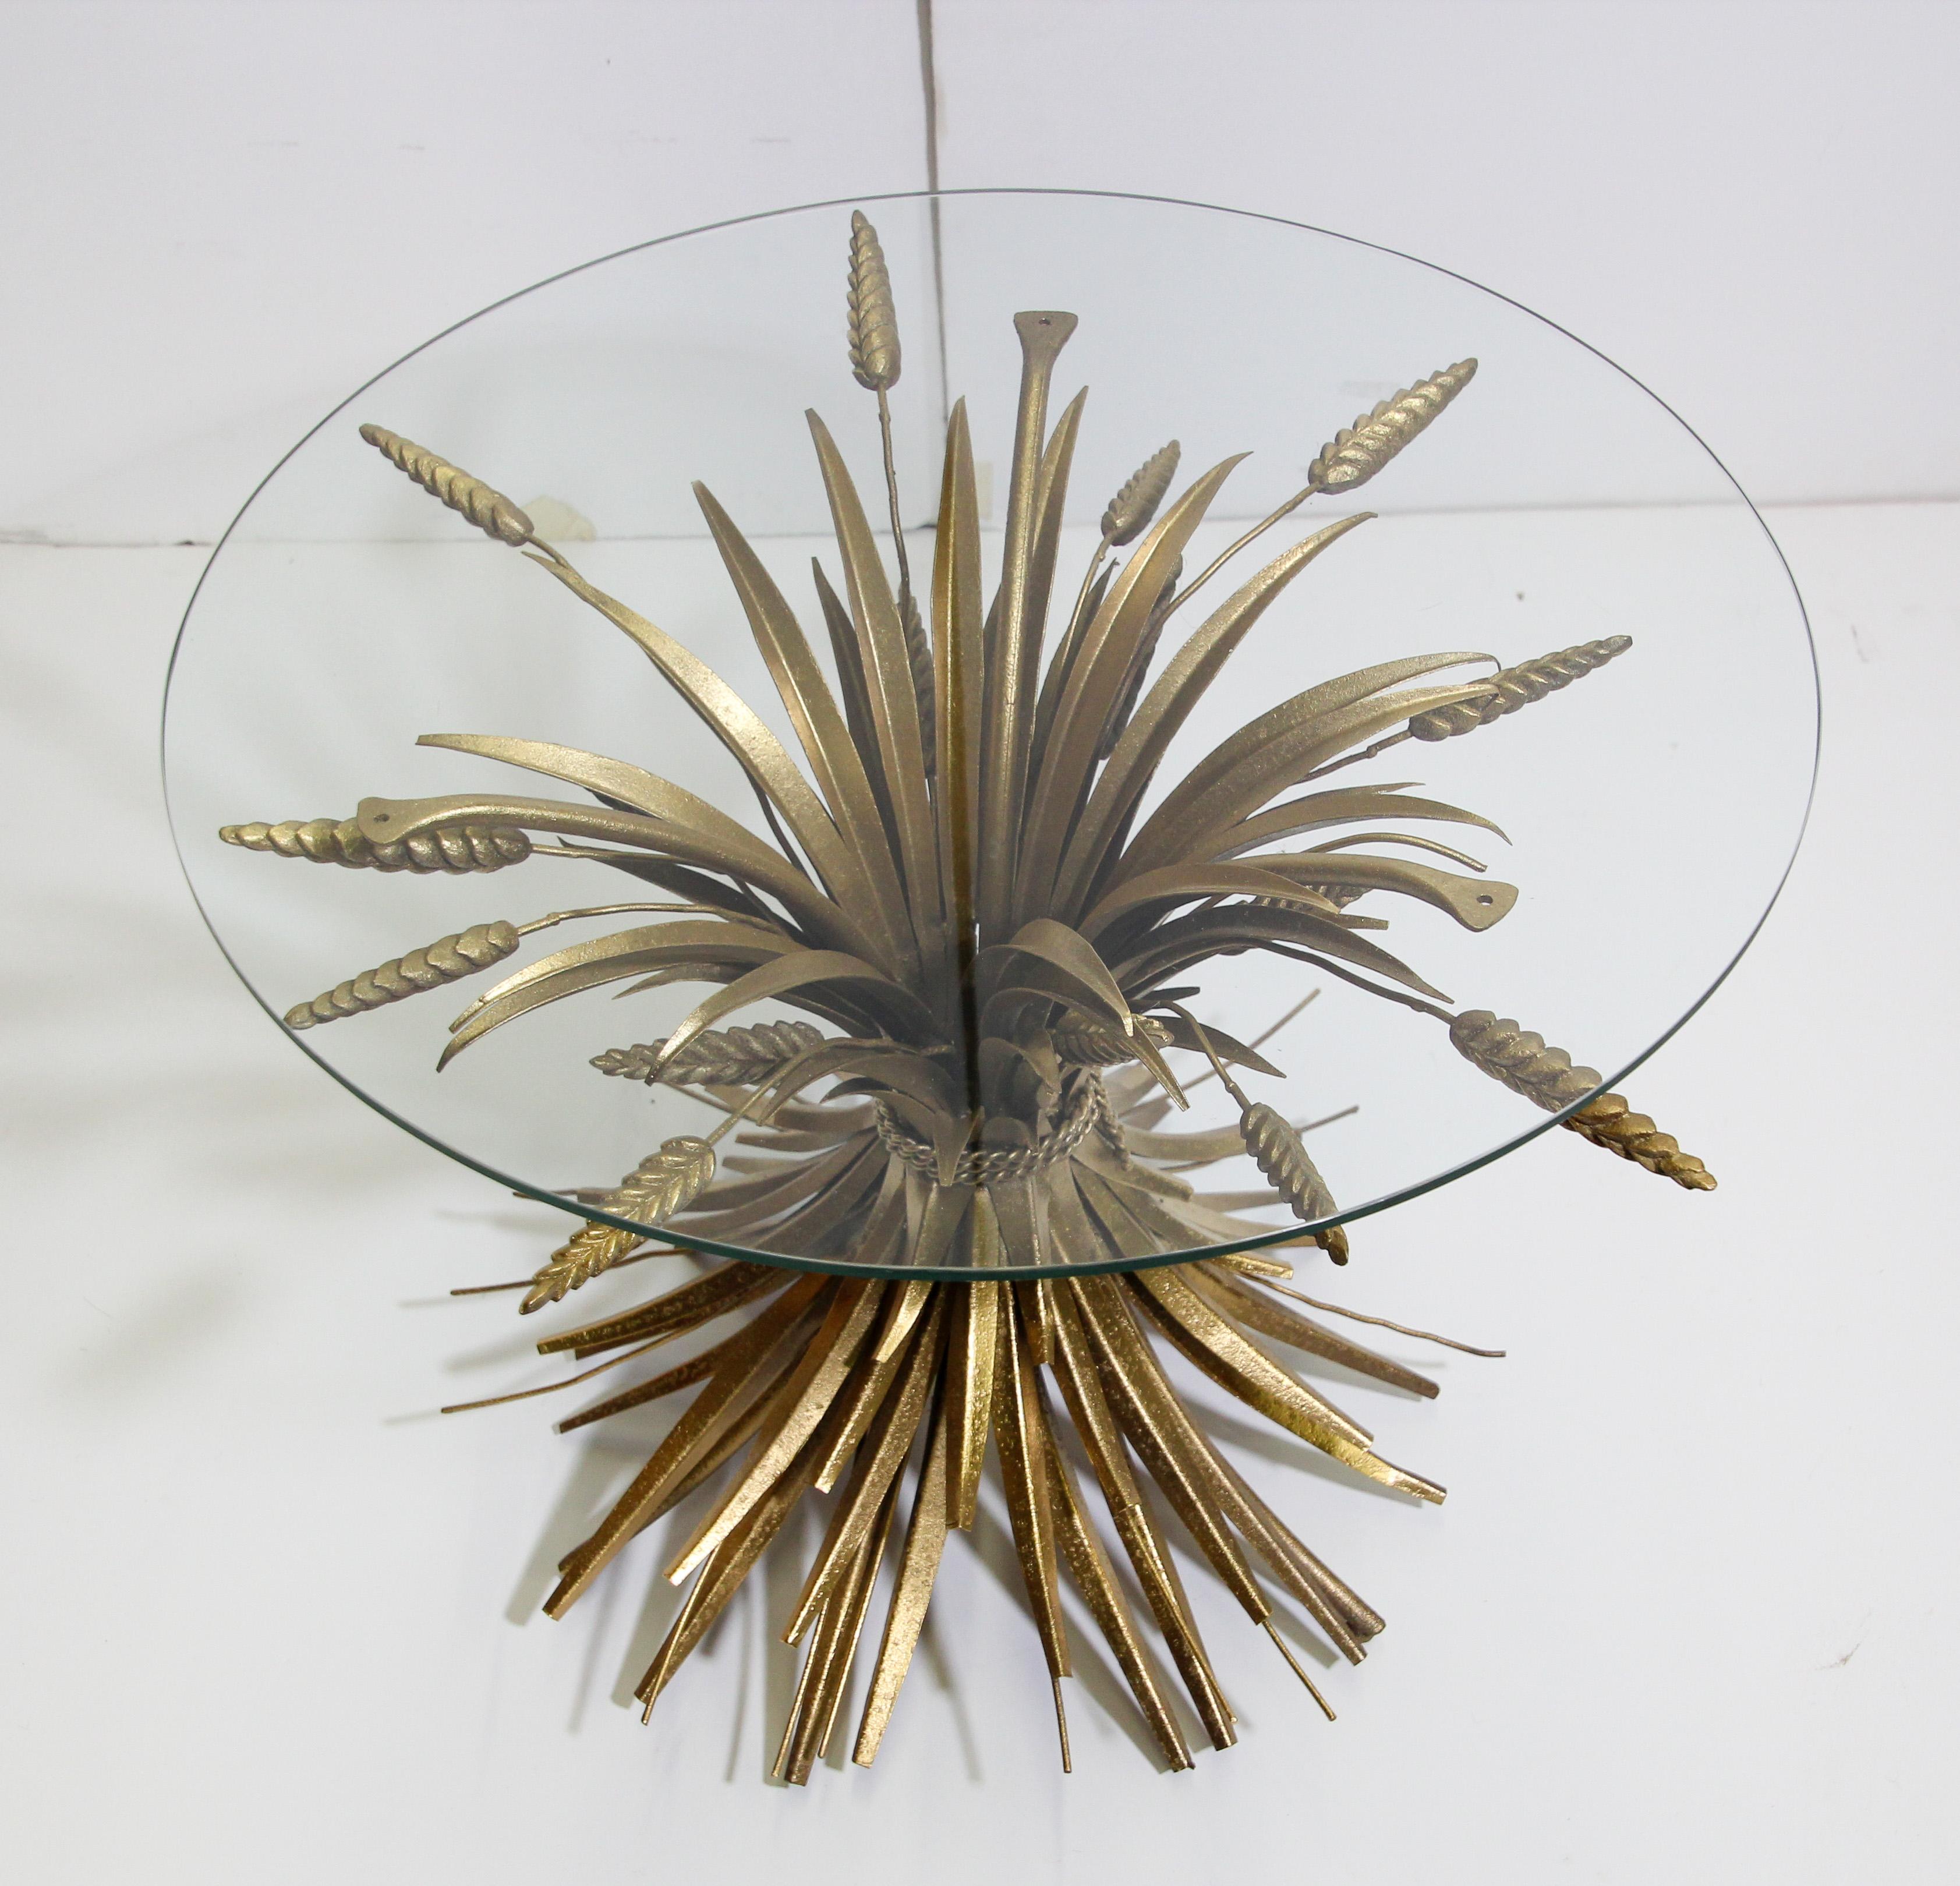 Vintage French midcentury gilded metal side table.
As seen in French Designer Coco Chanel Parisian apartment.
Classic and stylish side table with wheat sheaf base, made of gilded metal and a round glass top.
Nicely handcrafted with rope and wheat